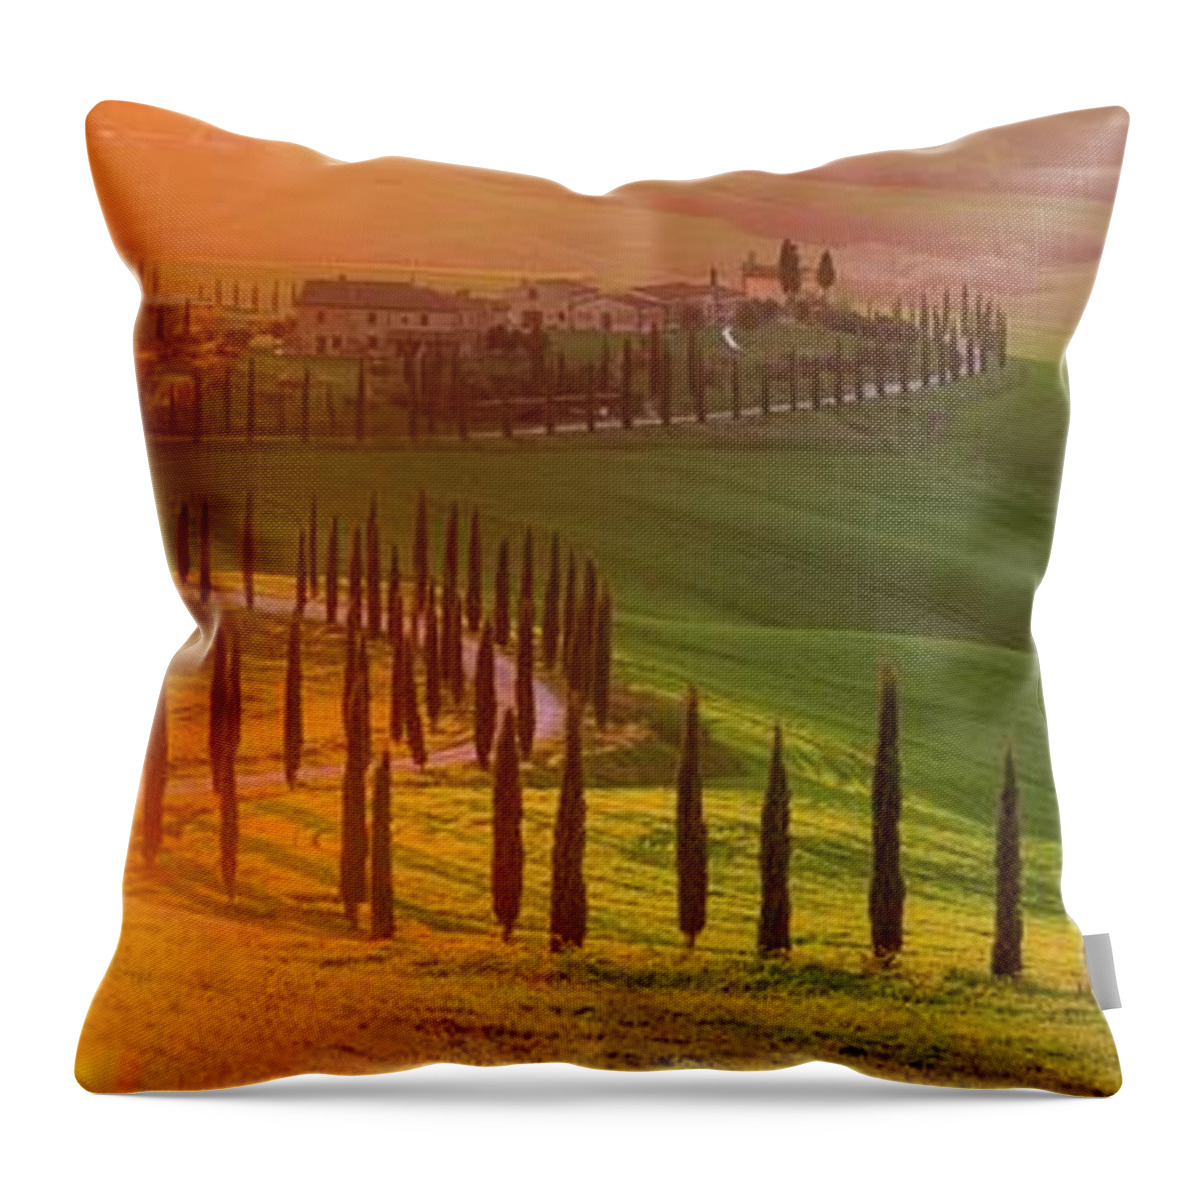 Tuscany; Villa; Green; Hills; Italy; Belvedere; Val D'orcia; Cypress; Trees; Beautiful; Countryside; Sunset; Rolling; Italia; Toscana; Rob Davies; Robert Davies; Landscape; Gold; Sun; Flare; Lens Flare; Panorama; Gladiator; Location; S Shape; Road; Classic Throw Pillow featuring the photograph Golden Tuscany II by Rob Davies